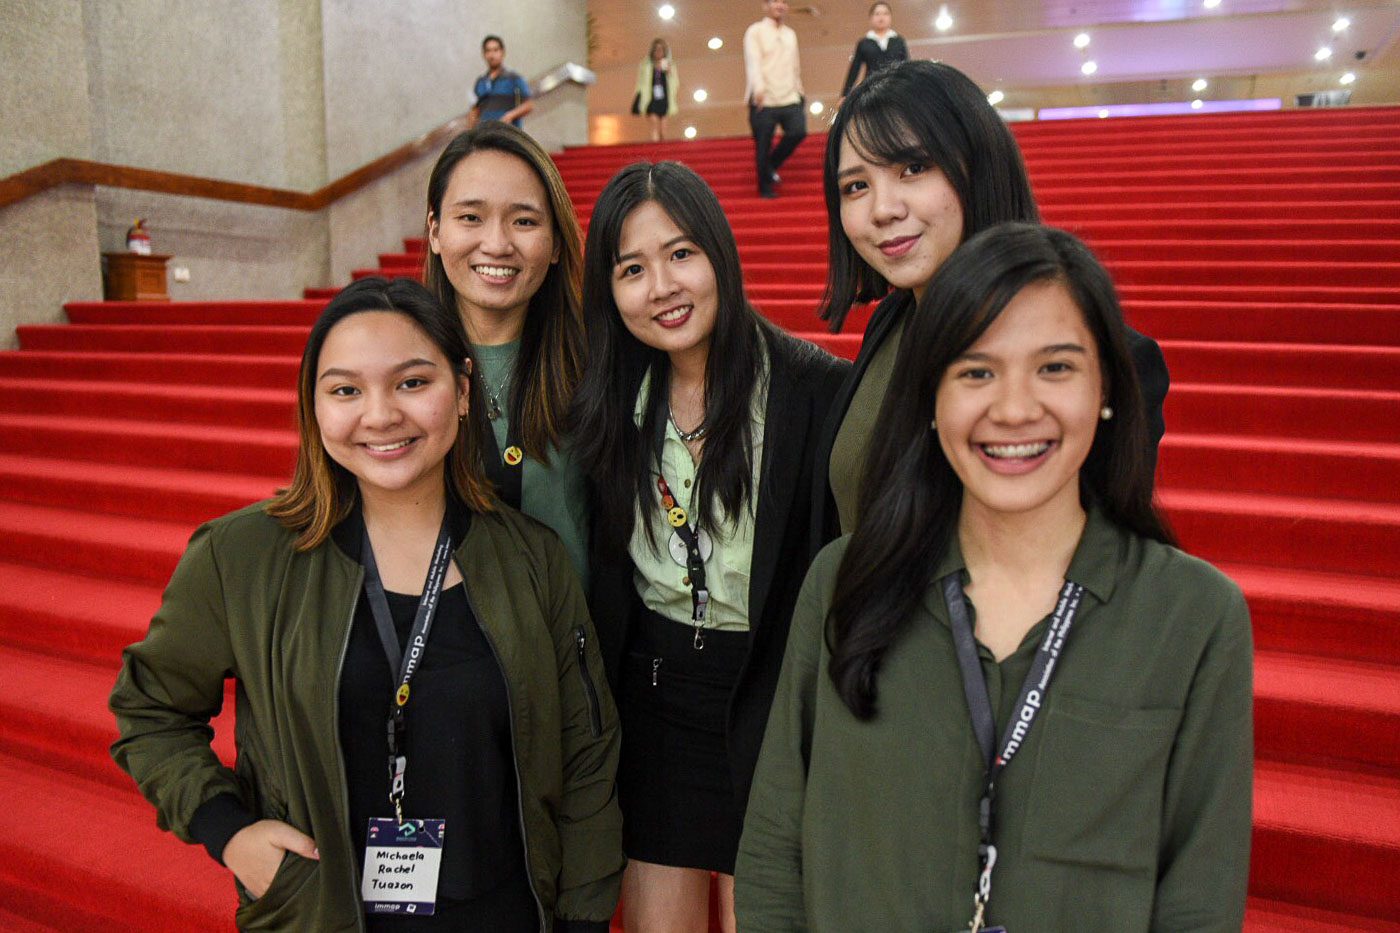 These students from FEU Cavite want you to rediscover adventures in Manila